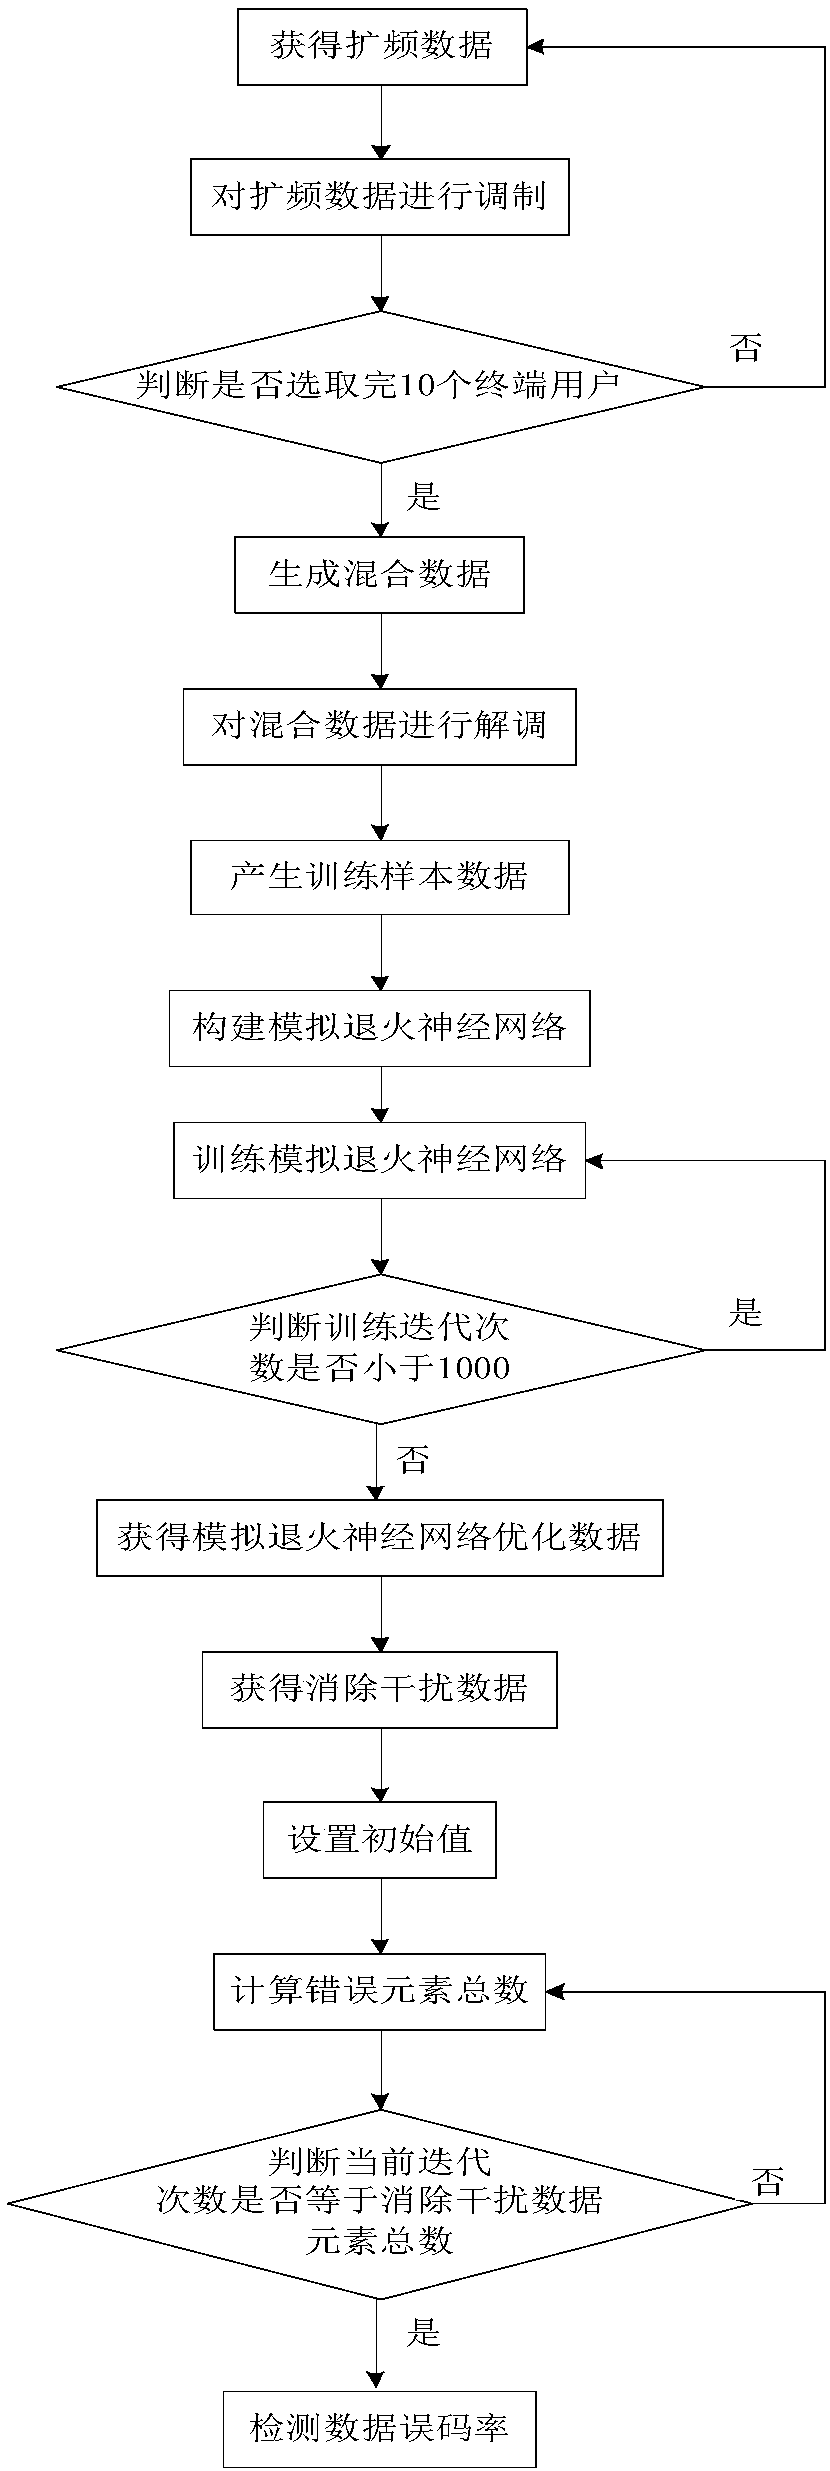 Data detection method based on simulated annealing neural network and interference elimination